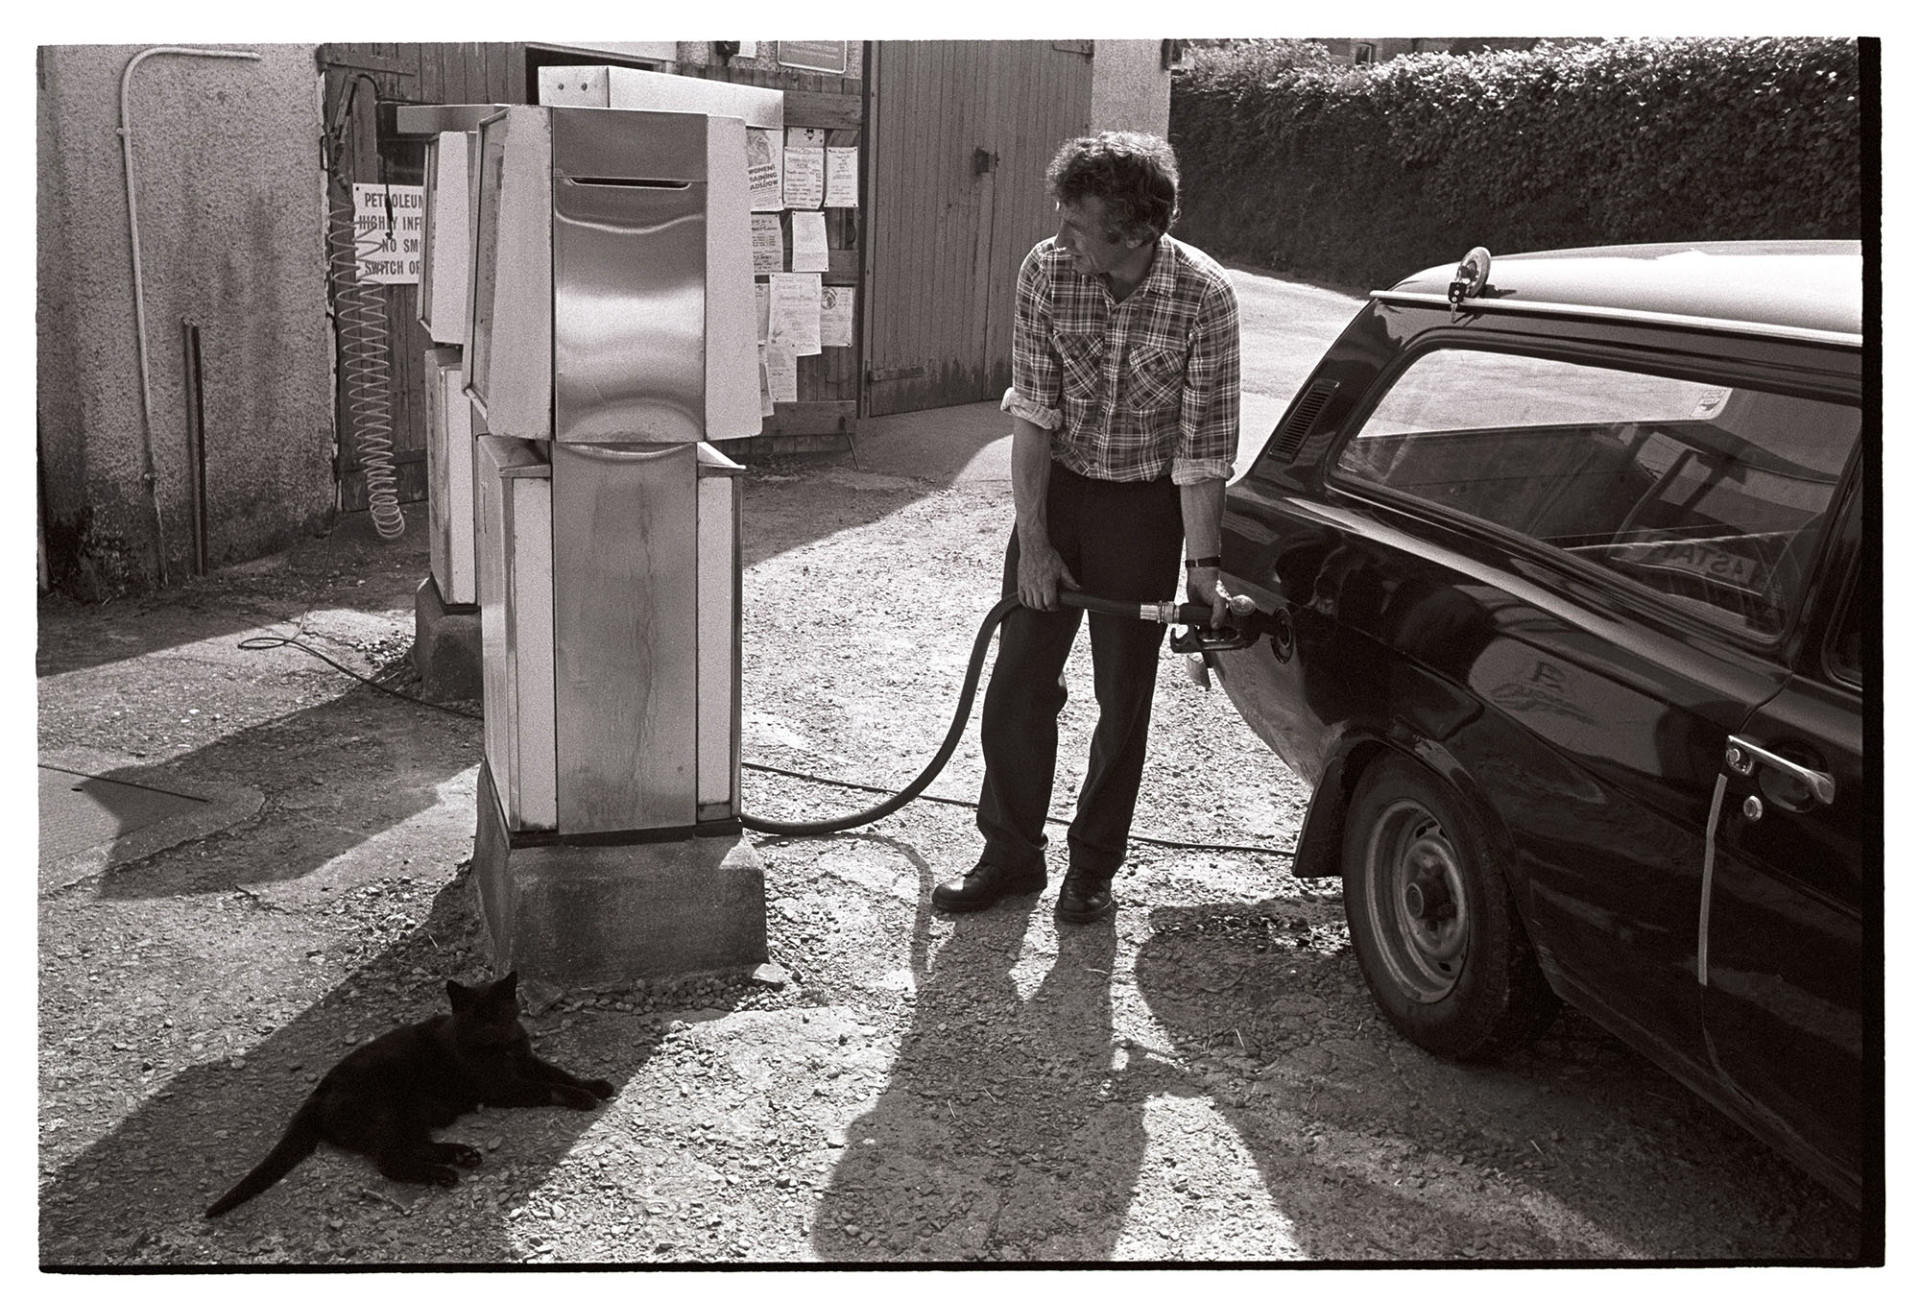 Man filling car with petrol at village garage. 
[A man filling his car with petrol from a petrol pump at the village garage in George Nympton. A cat is sat by the petrol pump.]